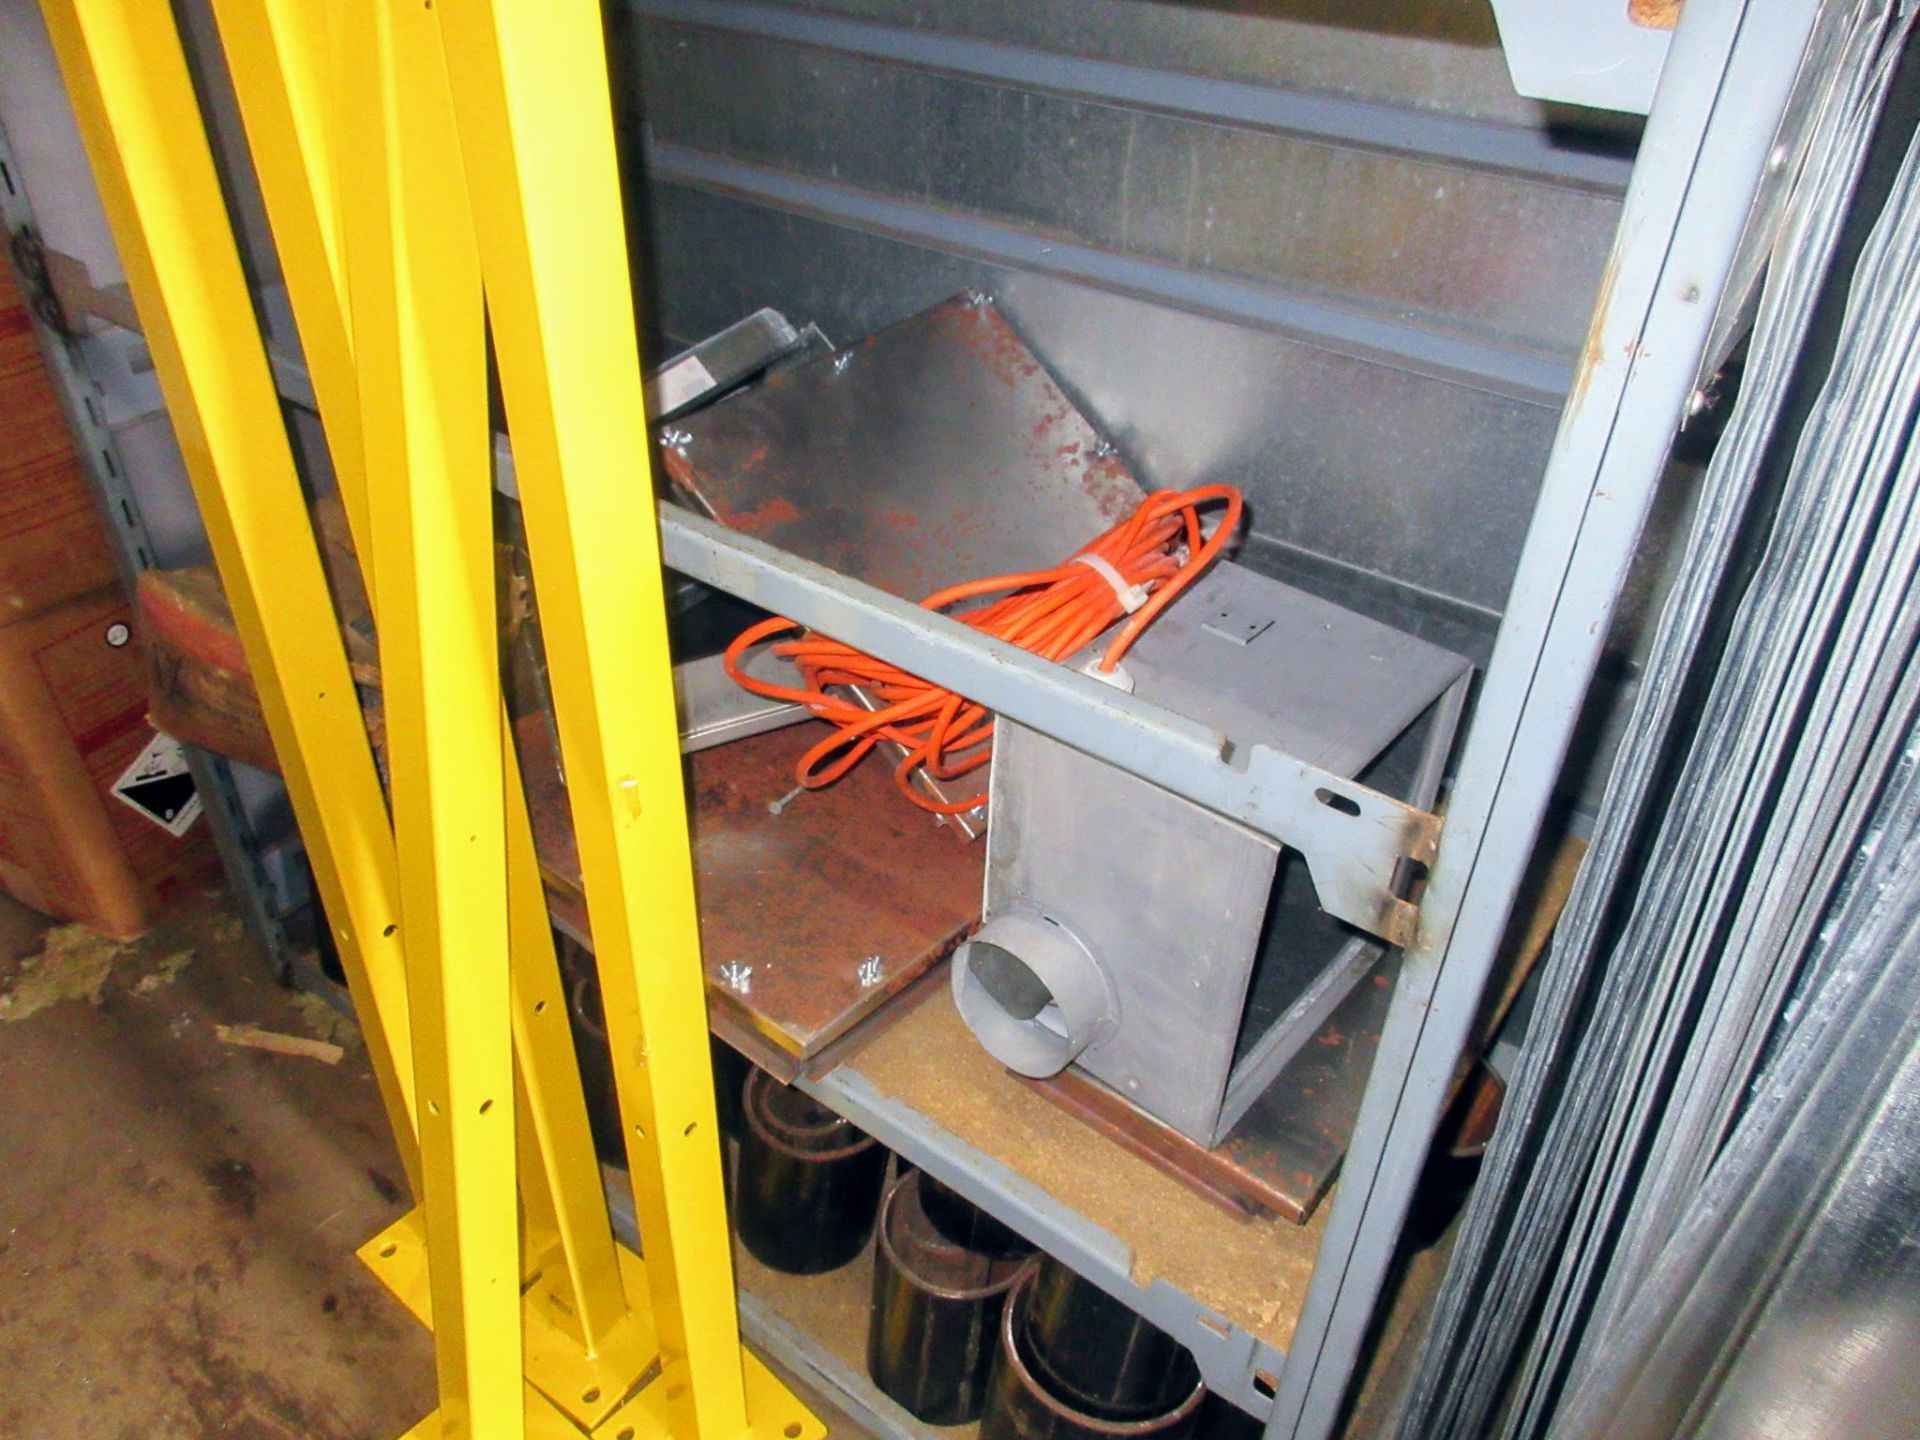 CONTENTS OF 20' SEACAN INCLUDING HVAC / DUCTWORK COMPONENTS, SUPPLIES, (4) U-LINE POSTS, ETC. - Image 7 of 11